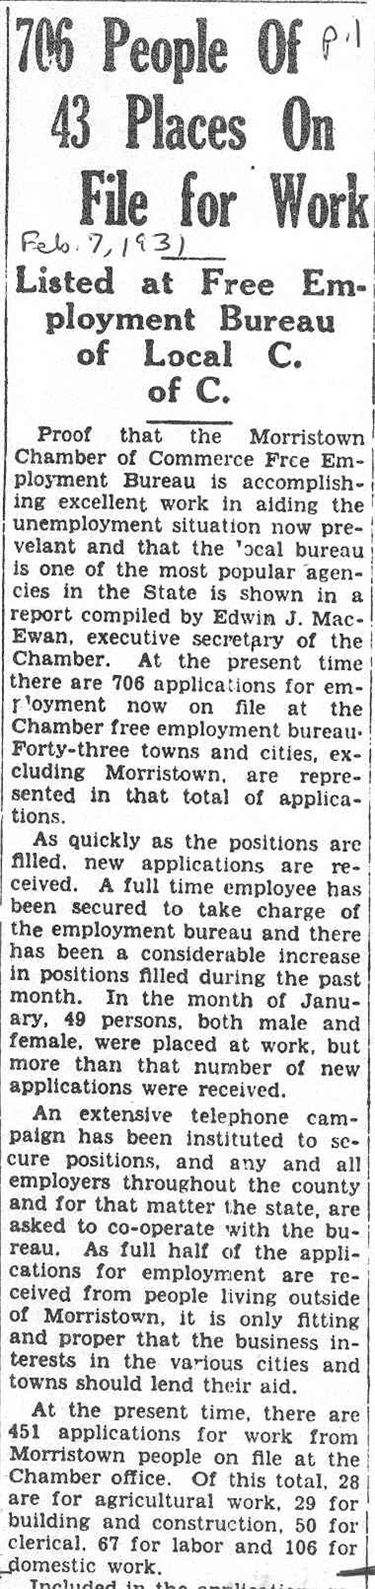 February 7, 1931: 706 People of 43 Places On File for Work